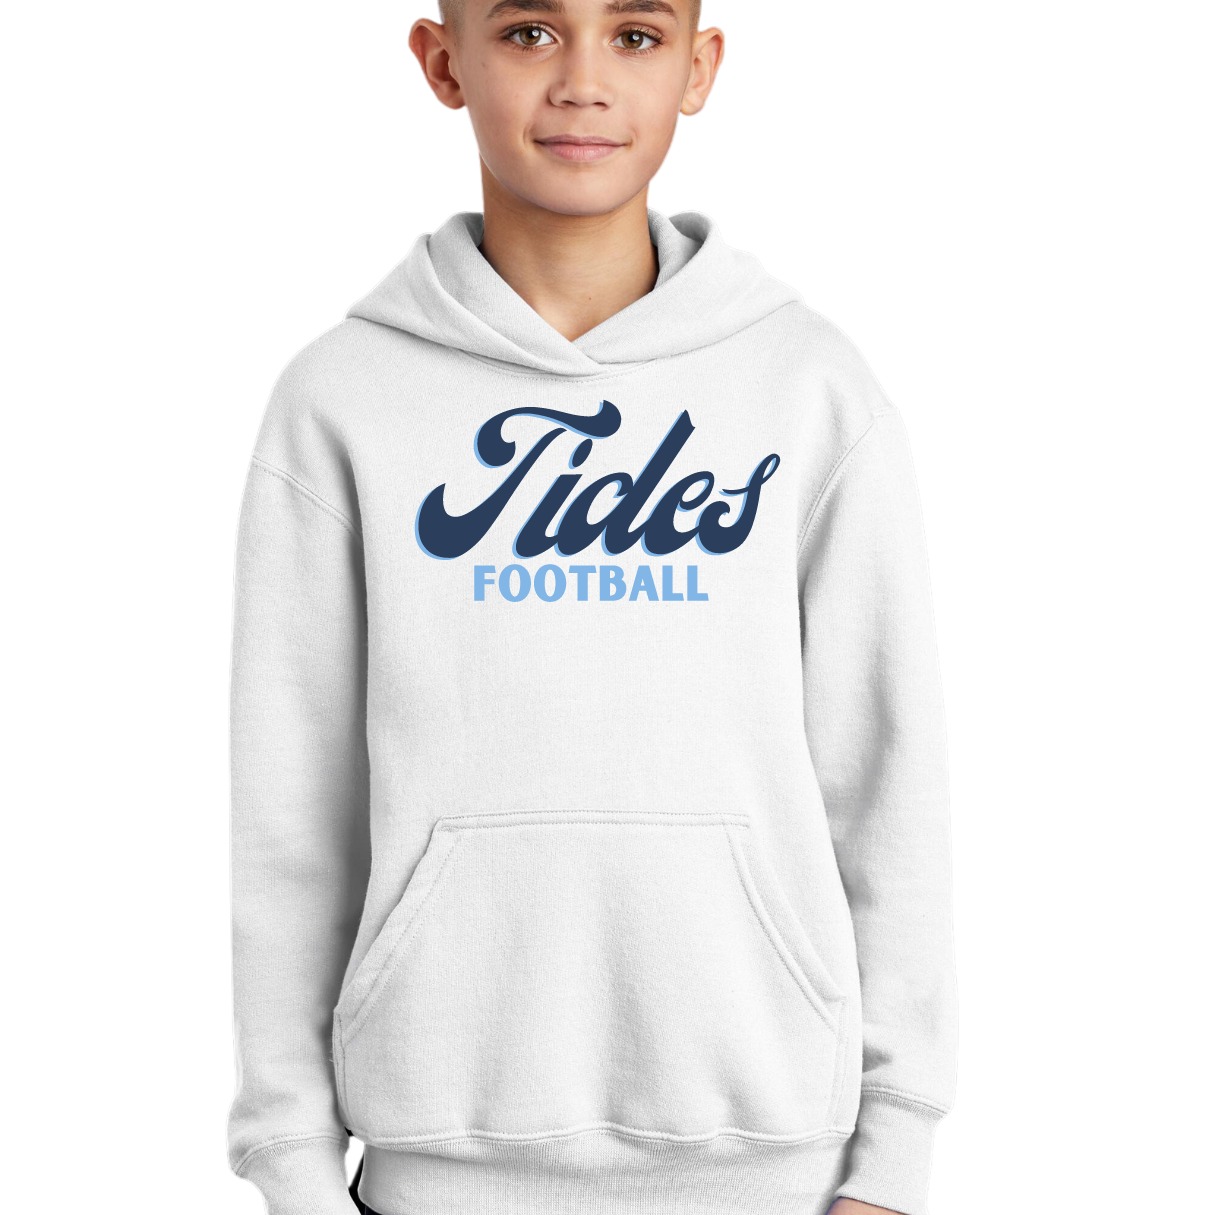 Retro Tides Football Hooded Sweatshirt- Adult and Youth